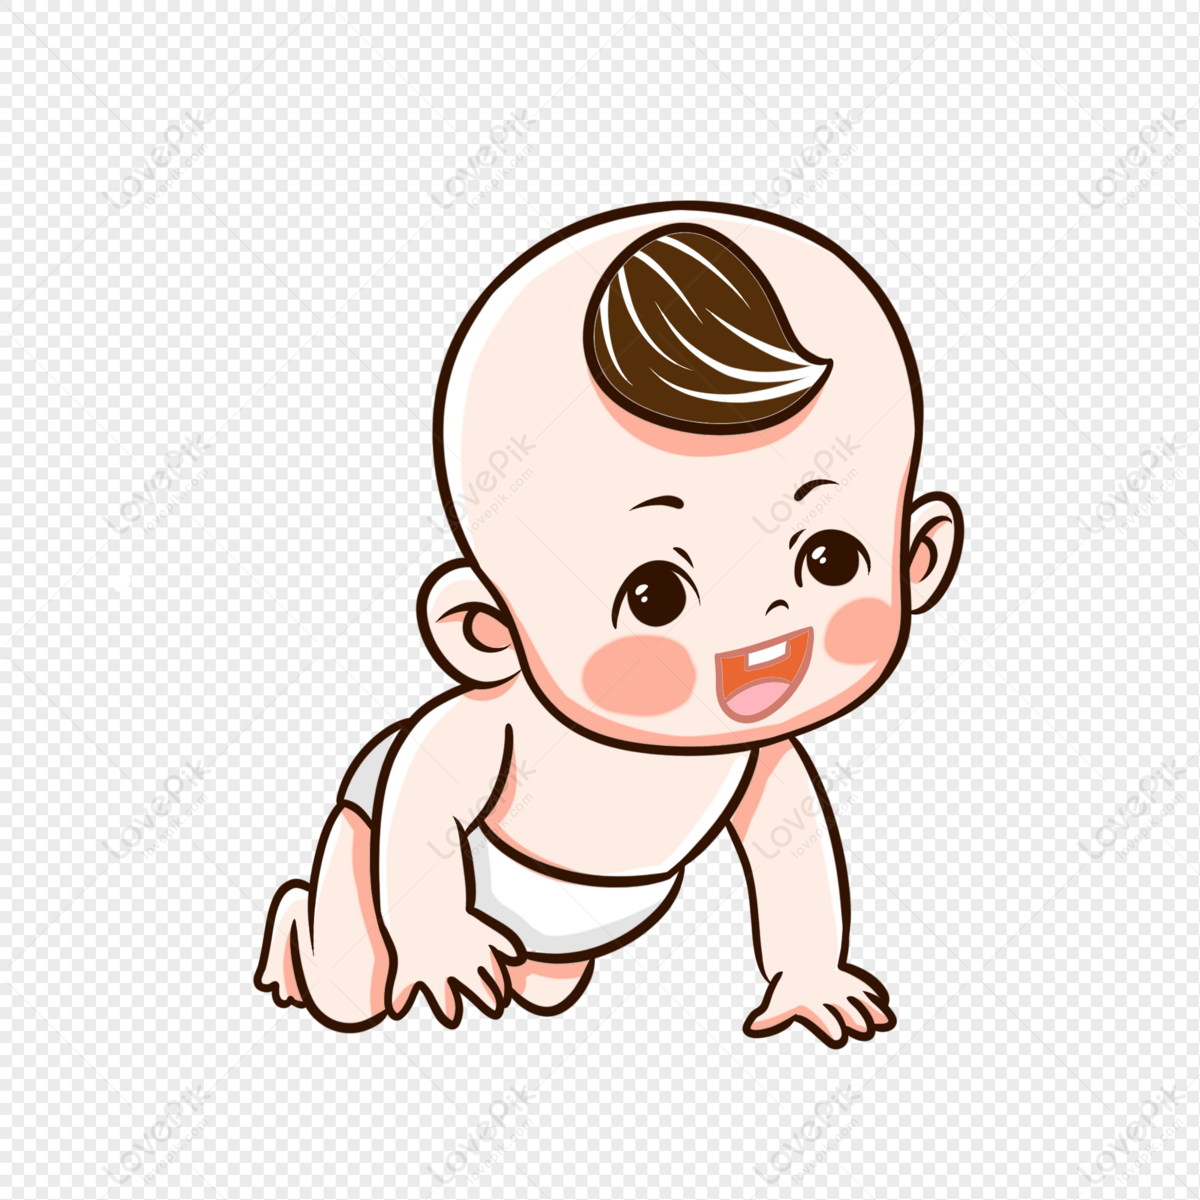 baby, baby, cute, crawling png hd transparent image